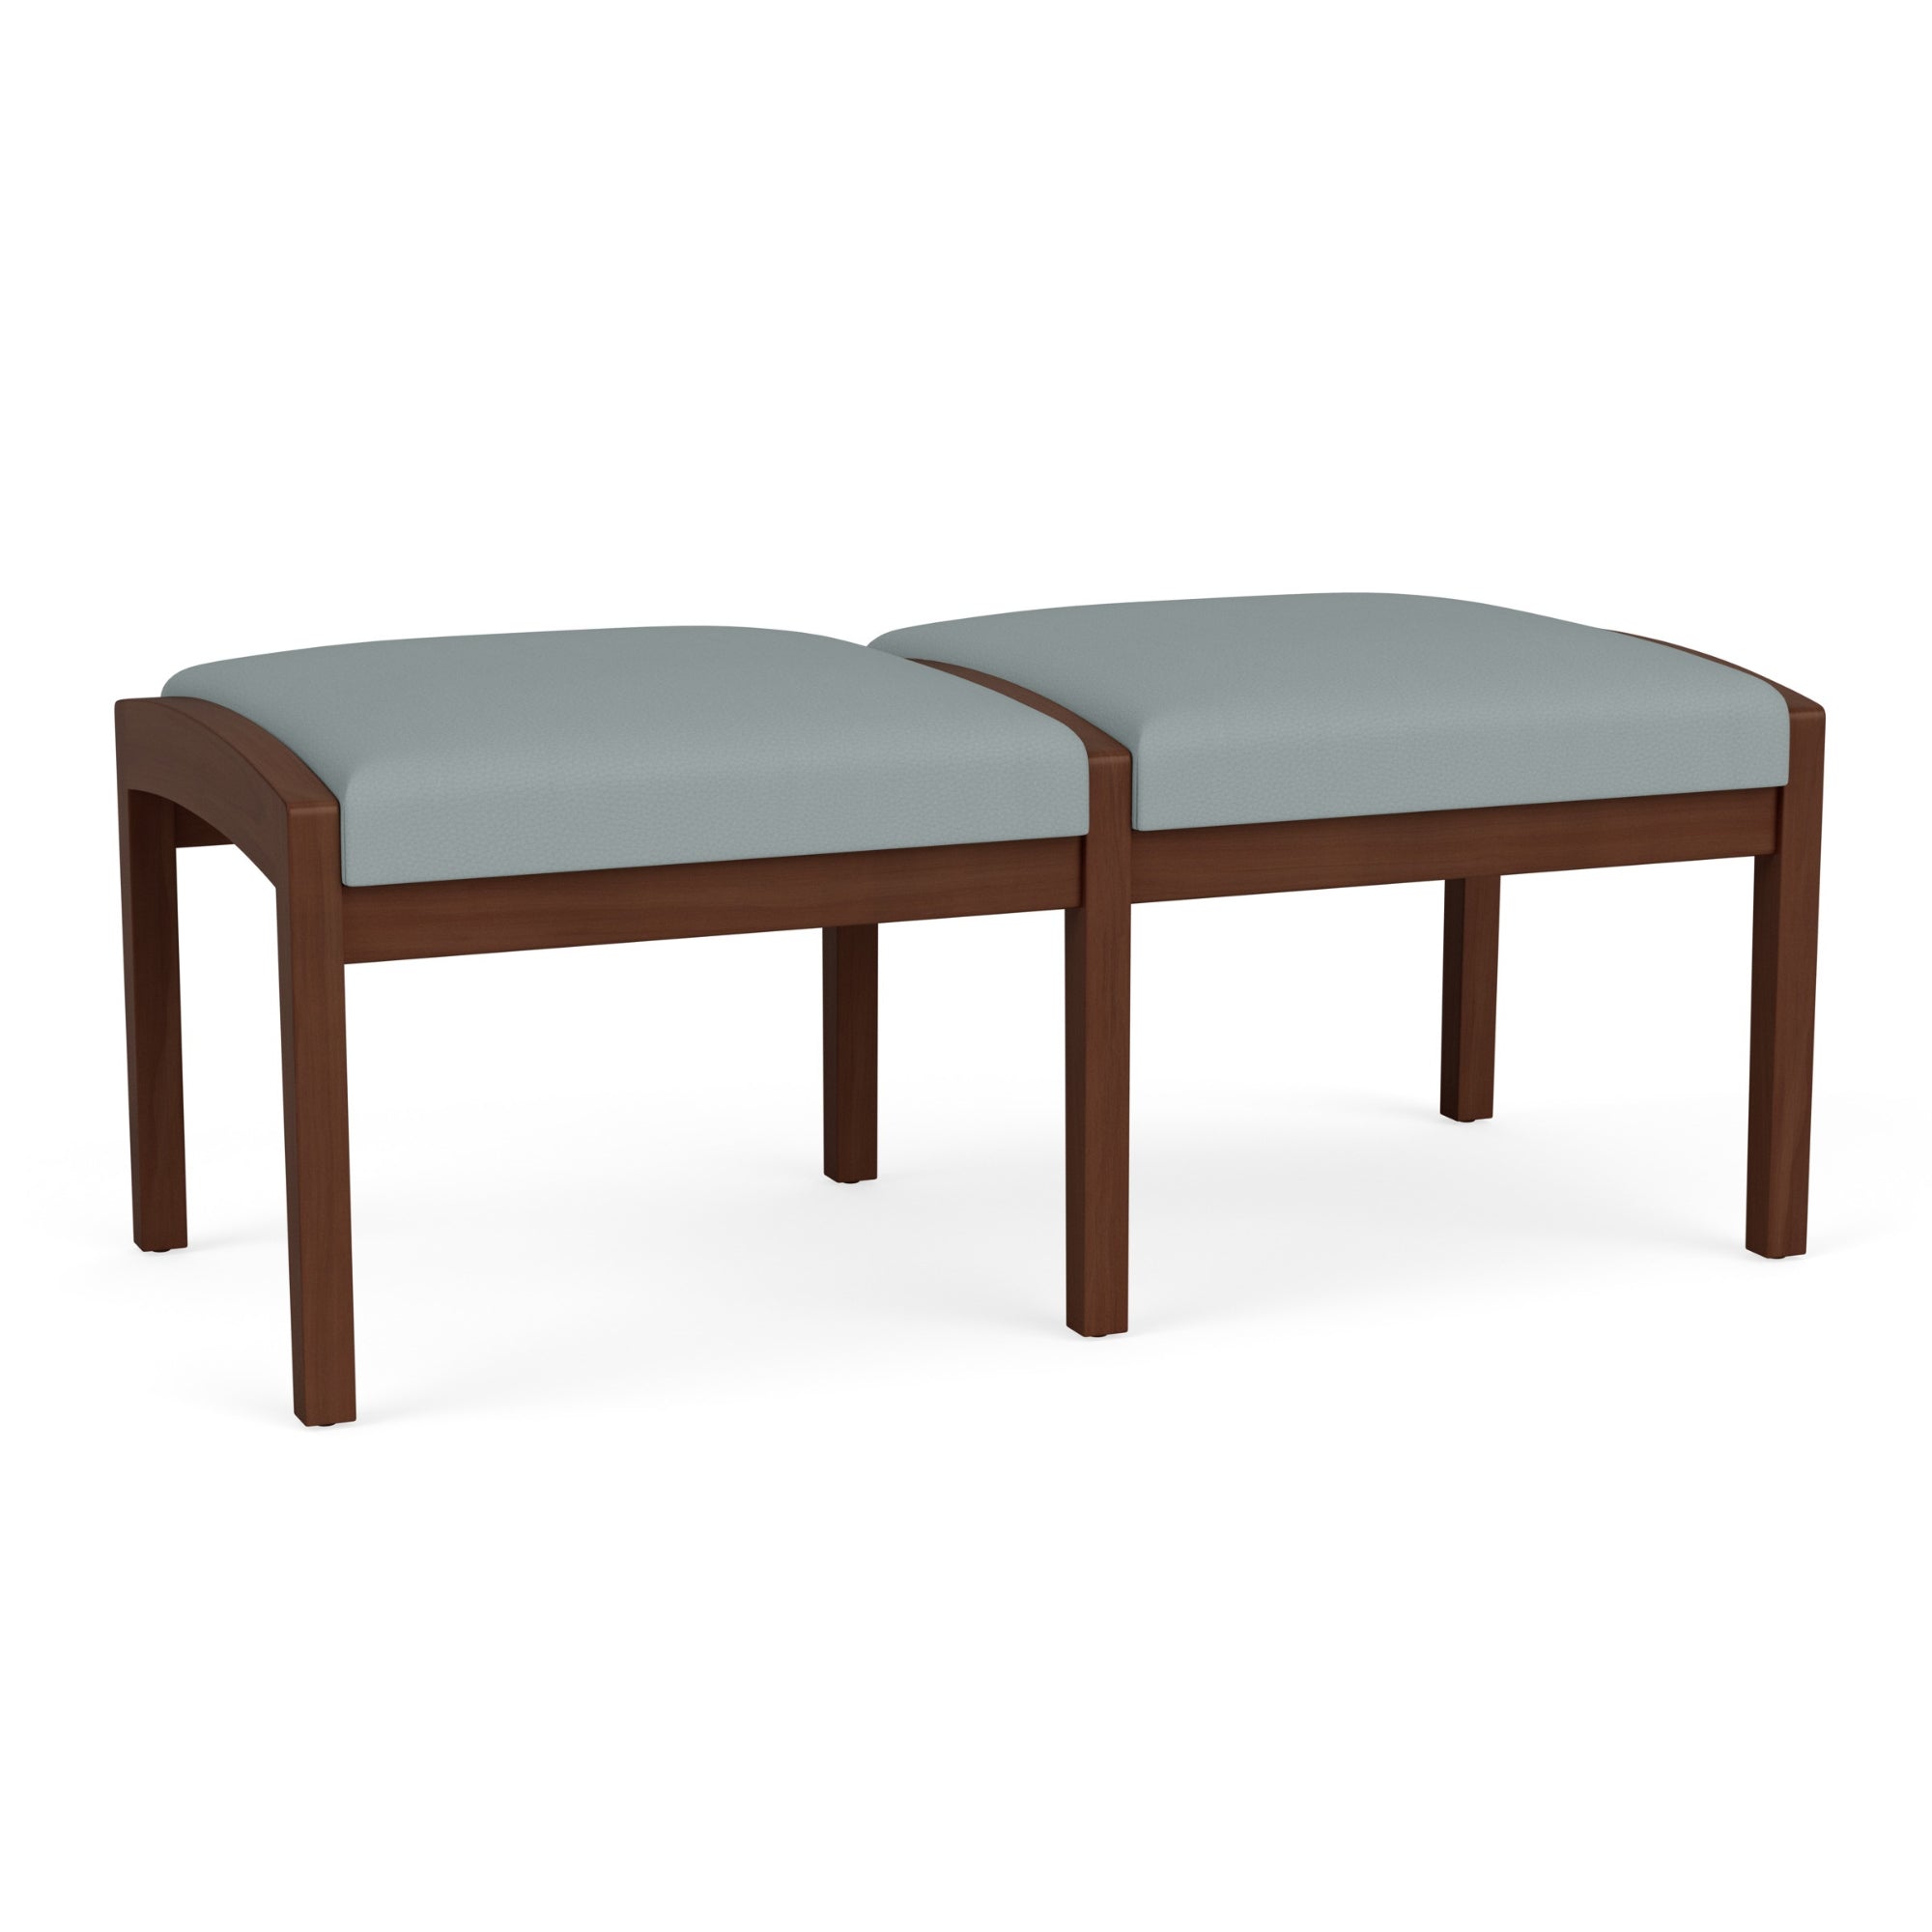 Lenox Wood Collection Reception Seating, 2 Seat Bench, Healthcare Vinyl Upholstery, FREE SHIPPING